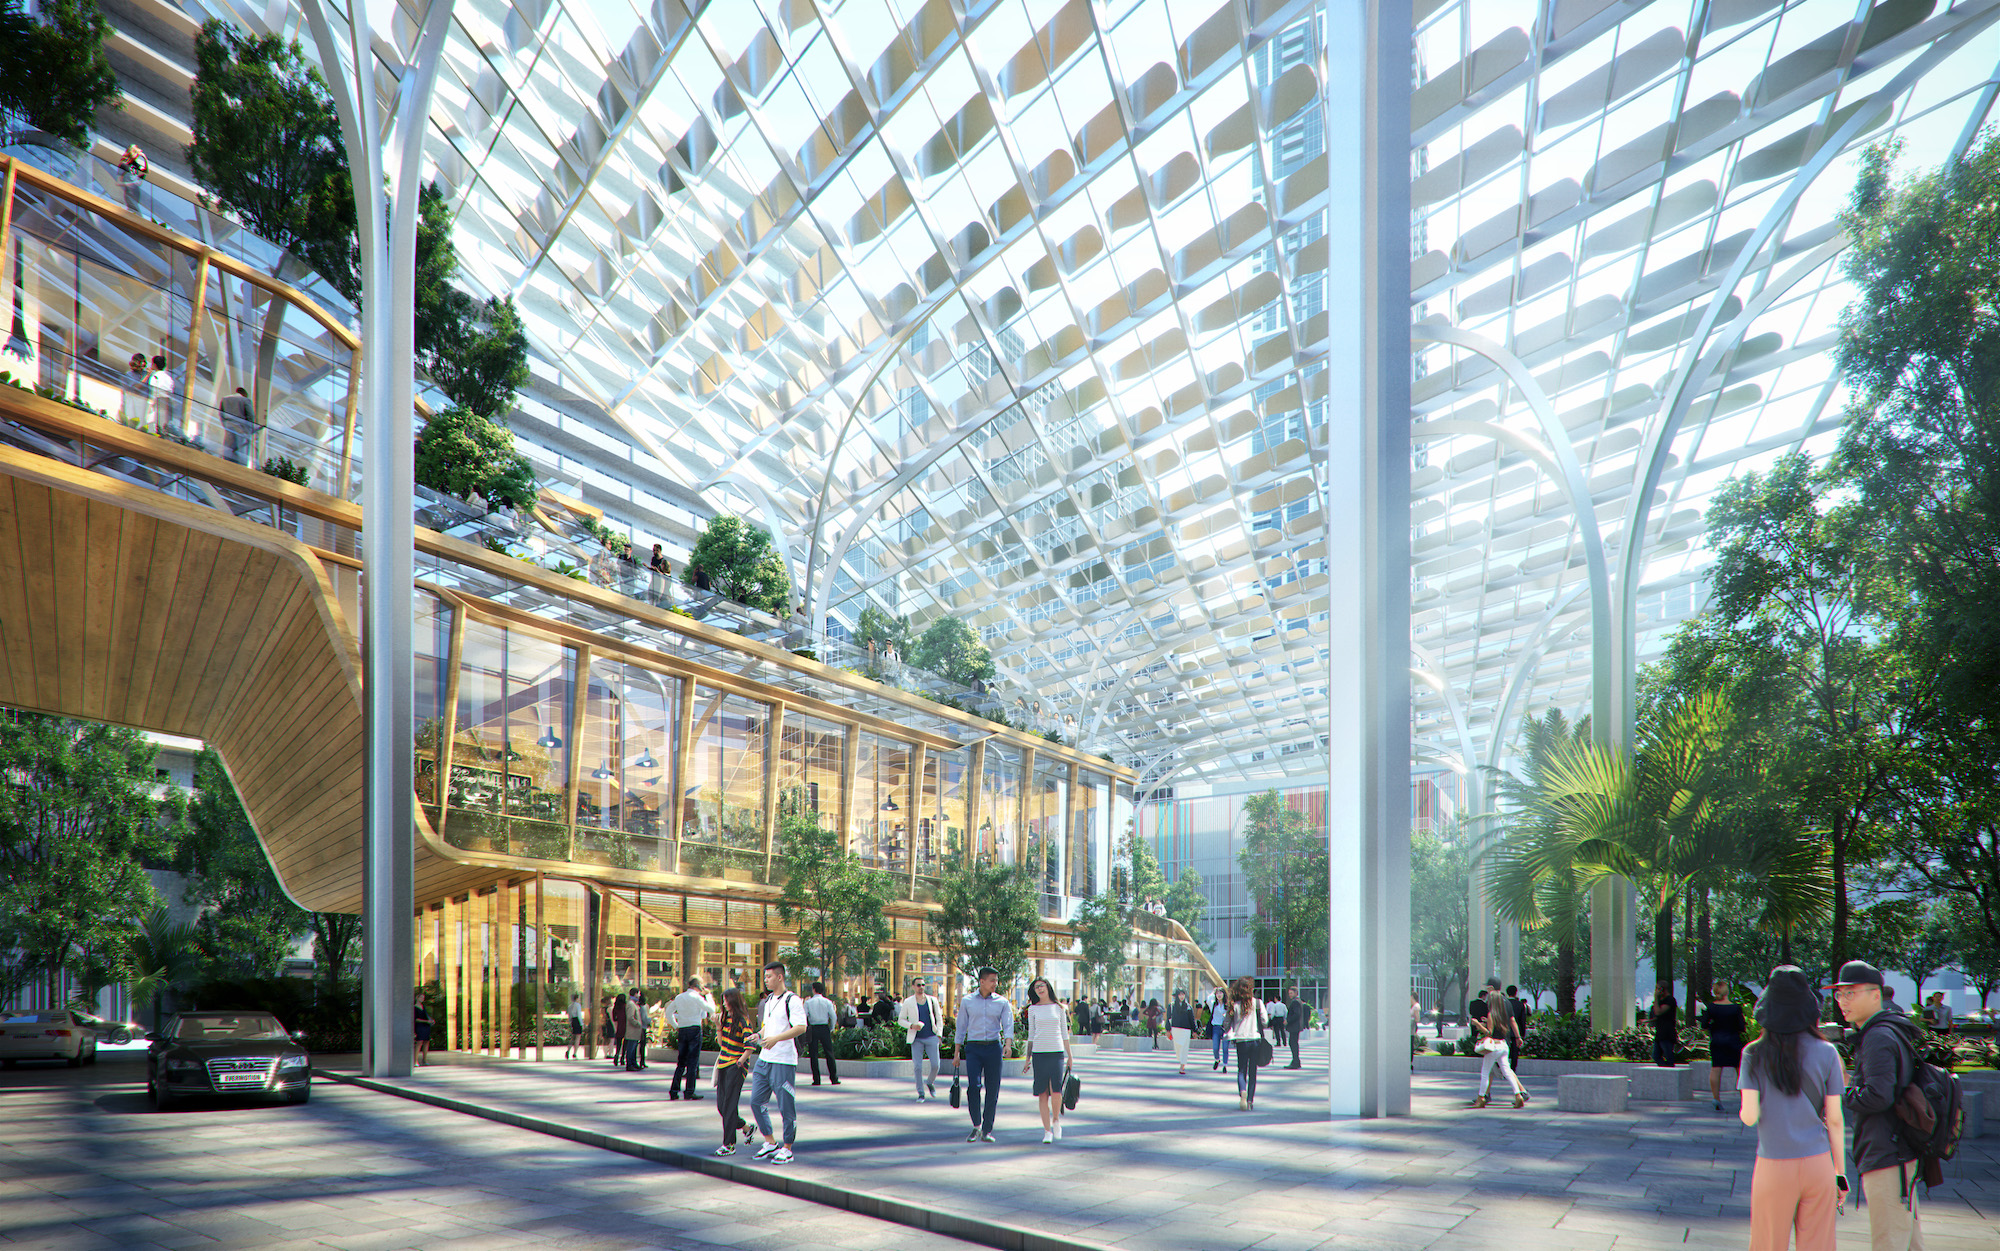 NBBJ-designed Keppel South Central tower in Singapore aims to reimagine work with restorative, outdoor spaces.  Courtesy NBBJ